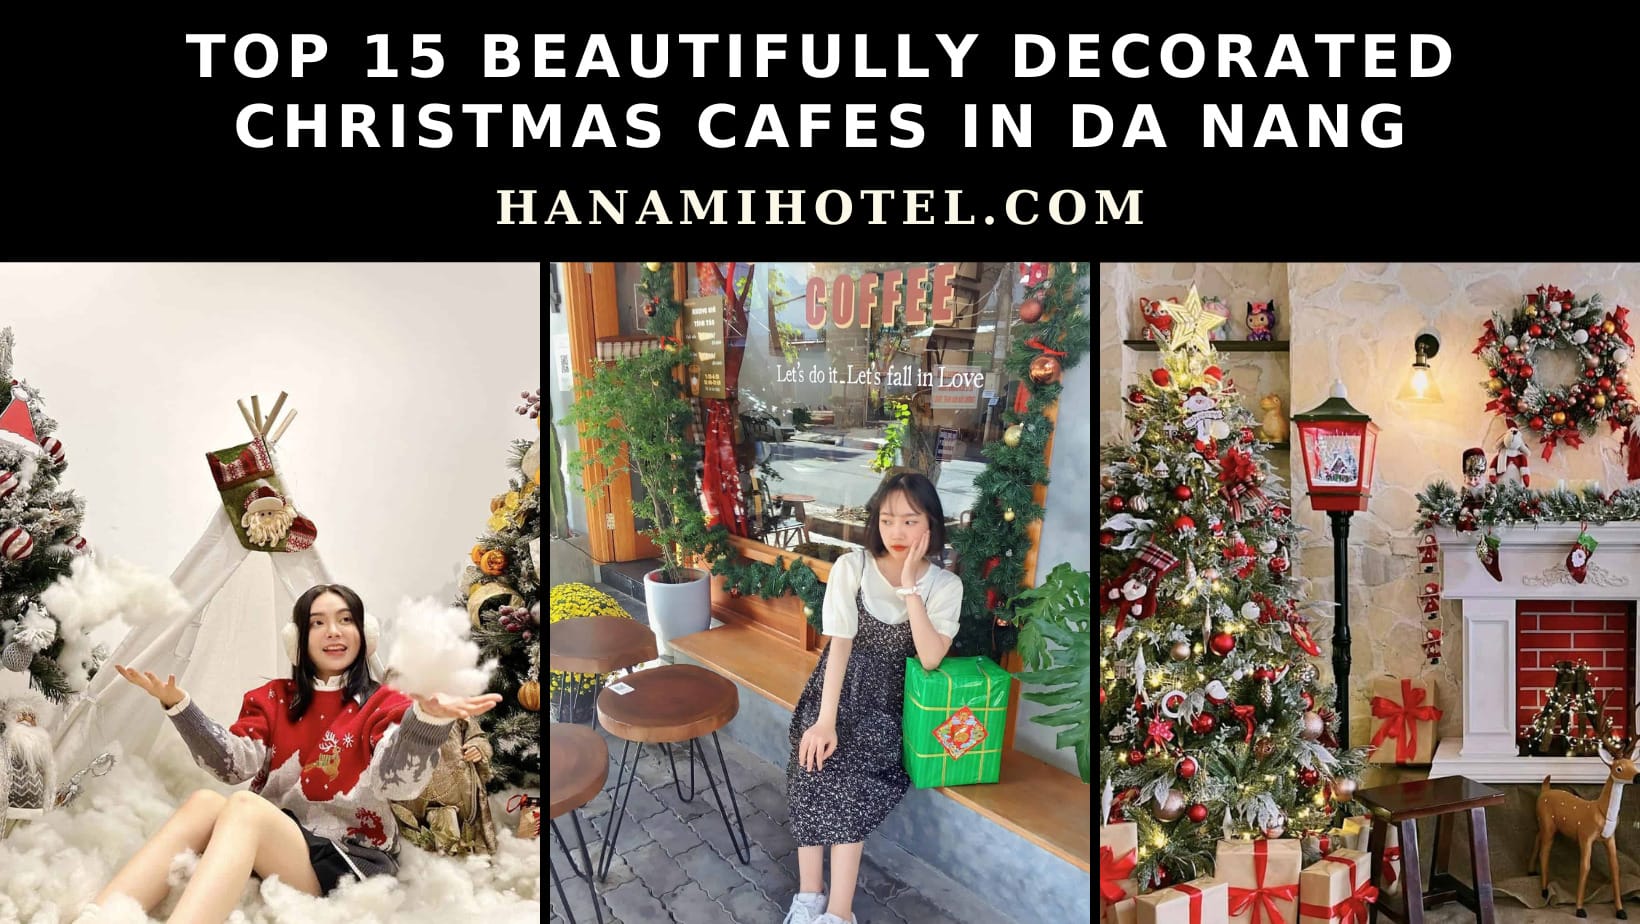 beautifully decorated Christmas cafes in da nang